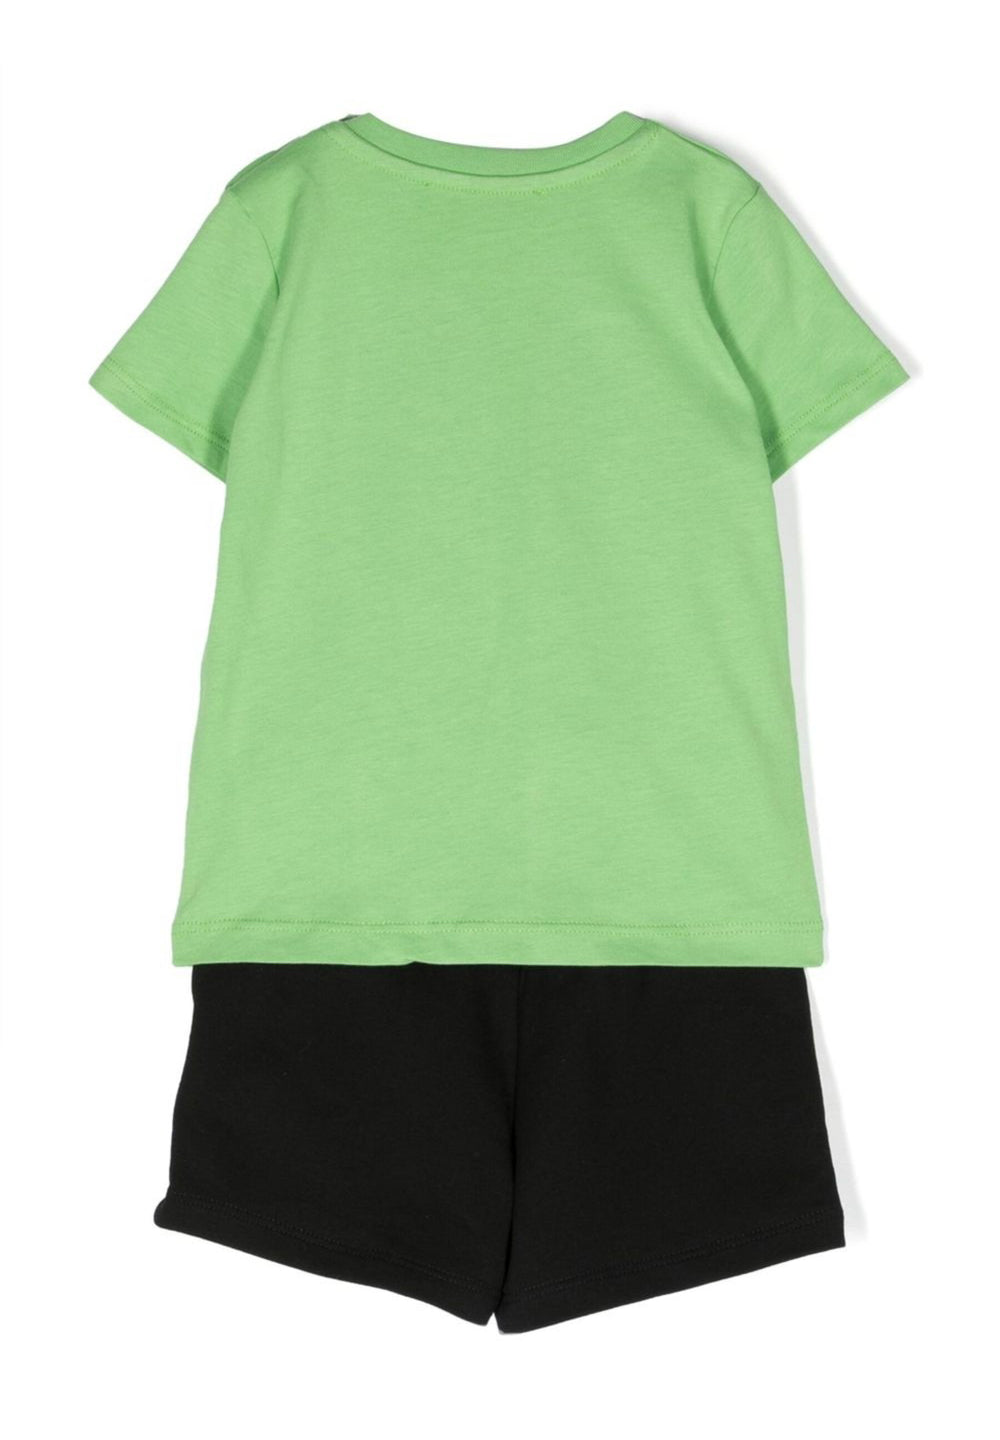 Green-black outfit for newborns